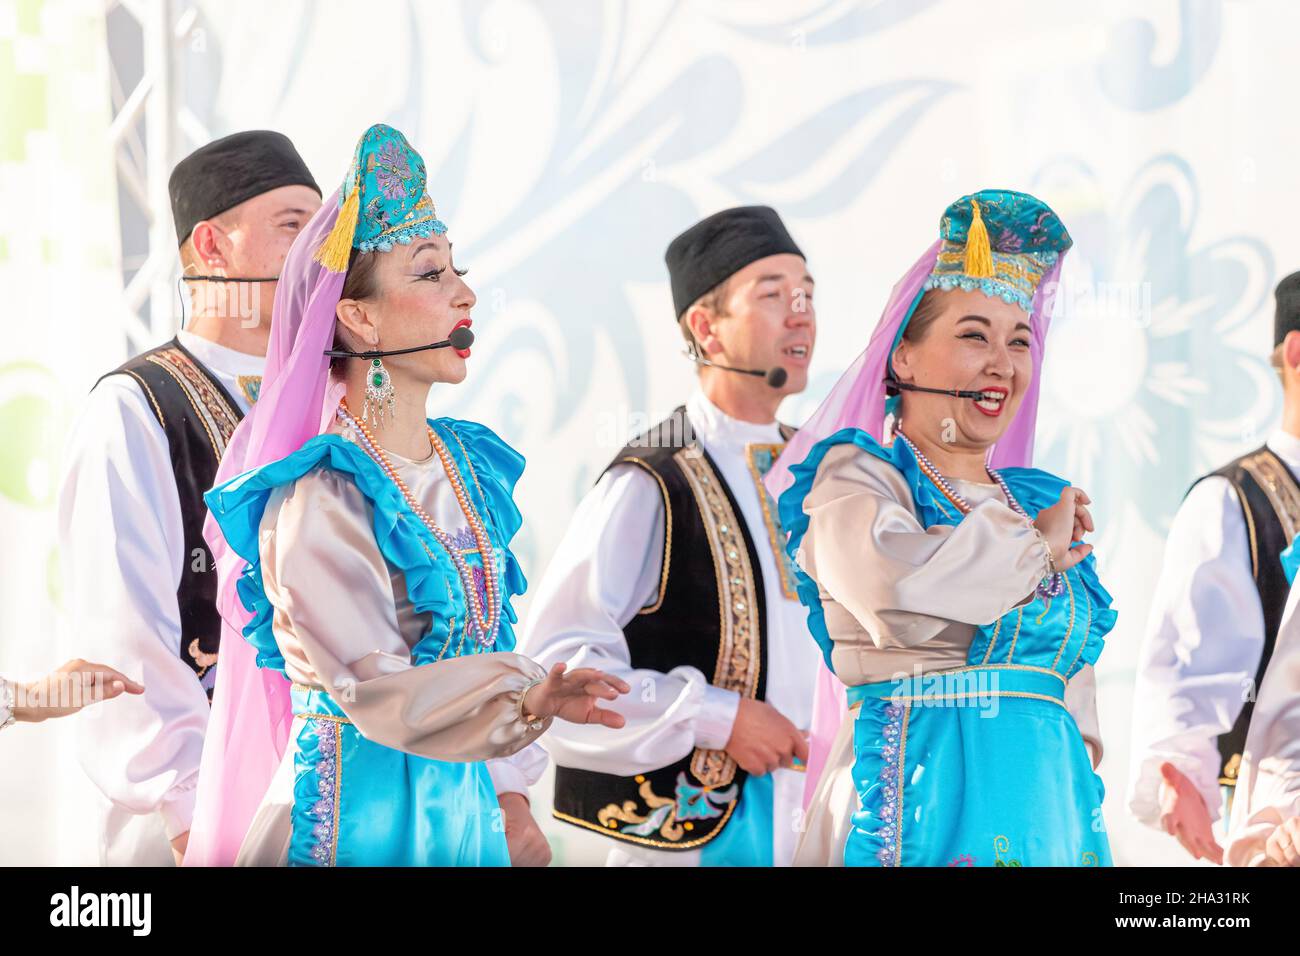 06 July 2021, Ufa, Russia: Tatar National Ensemble in traditional clothes dances and sings Stock Photo